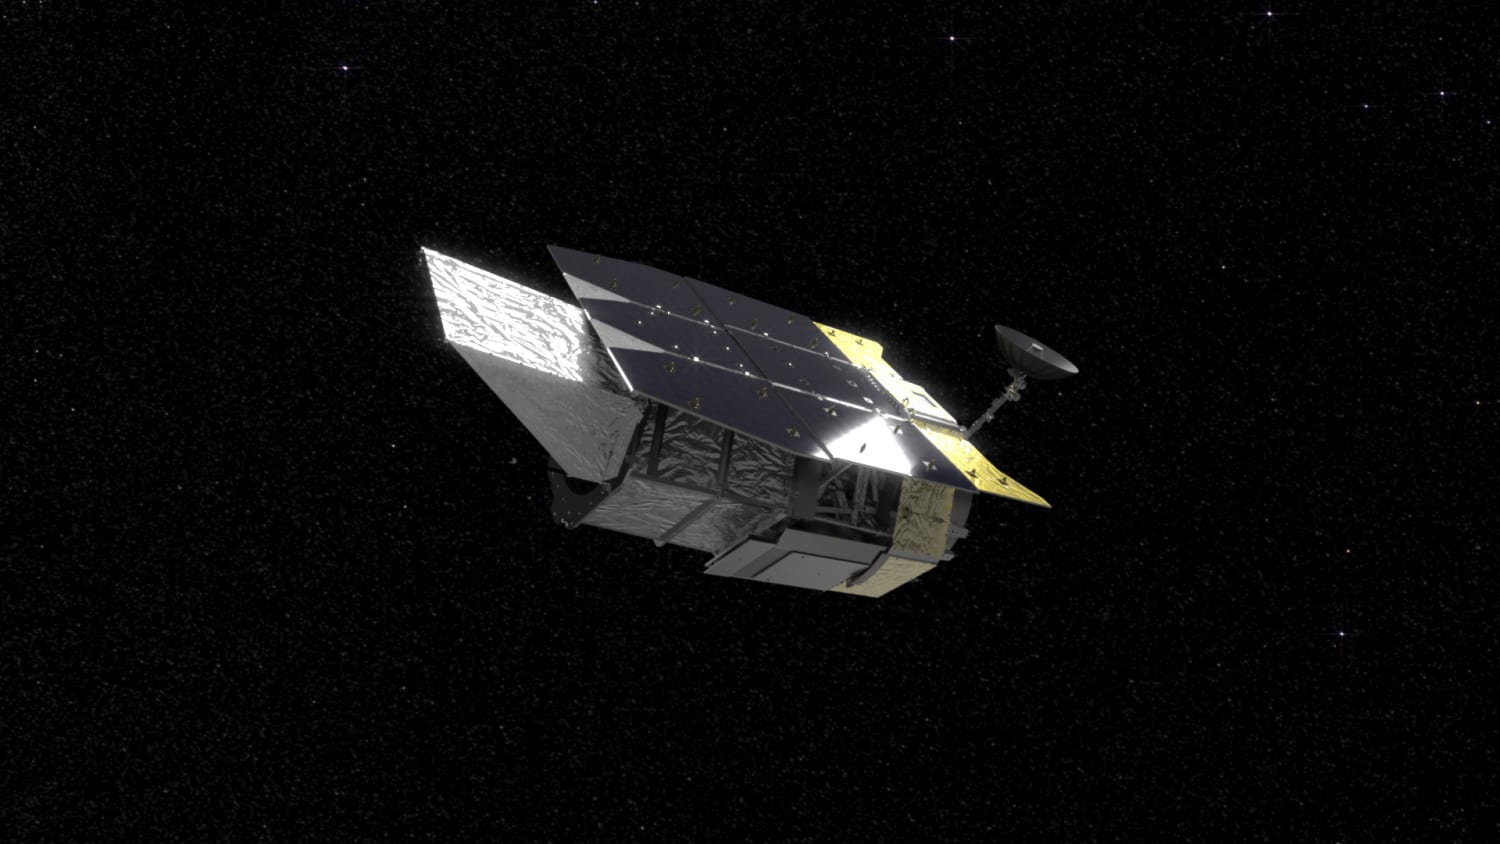 NASA to Make Announcement About WFIRST Space Telescope Mission